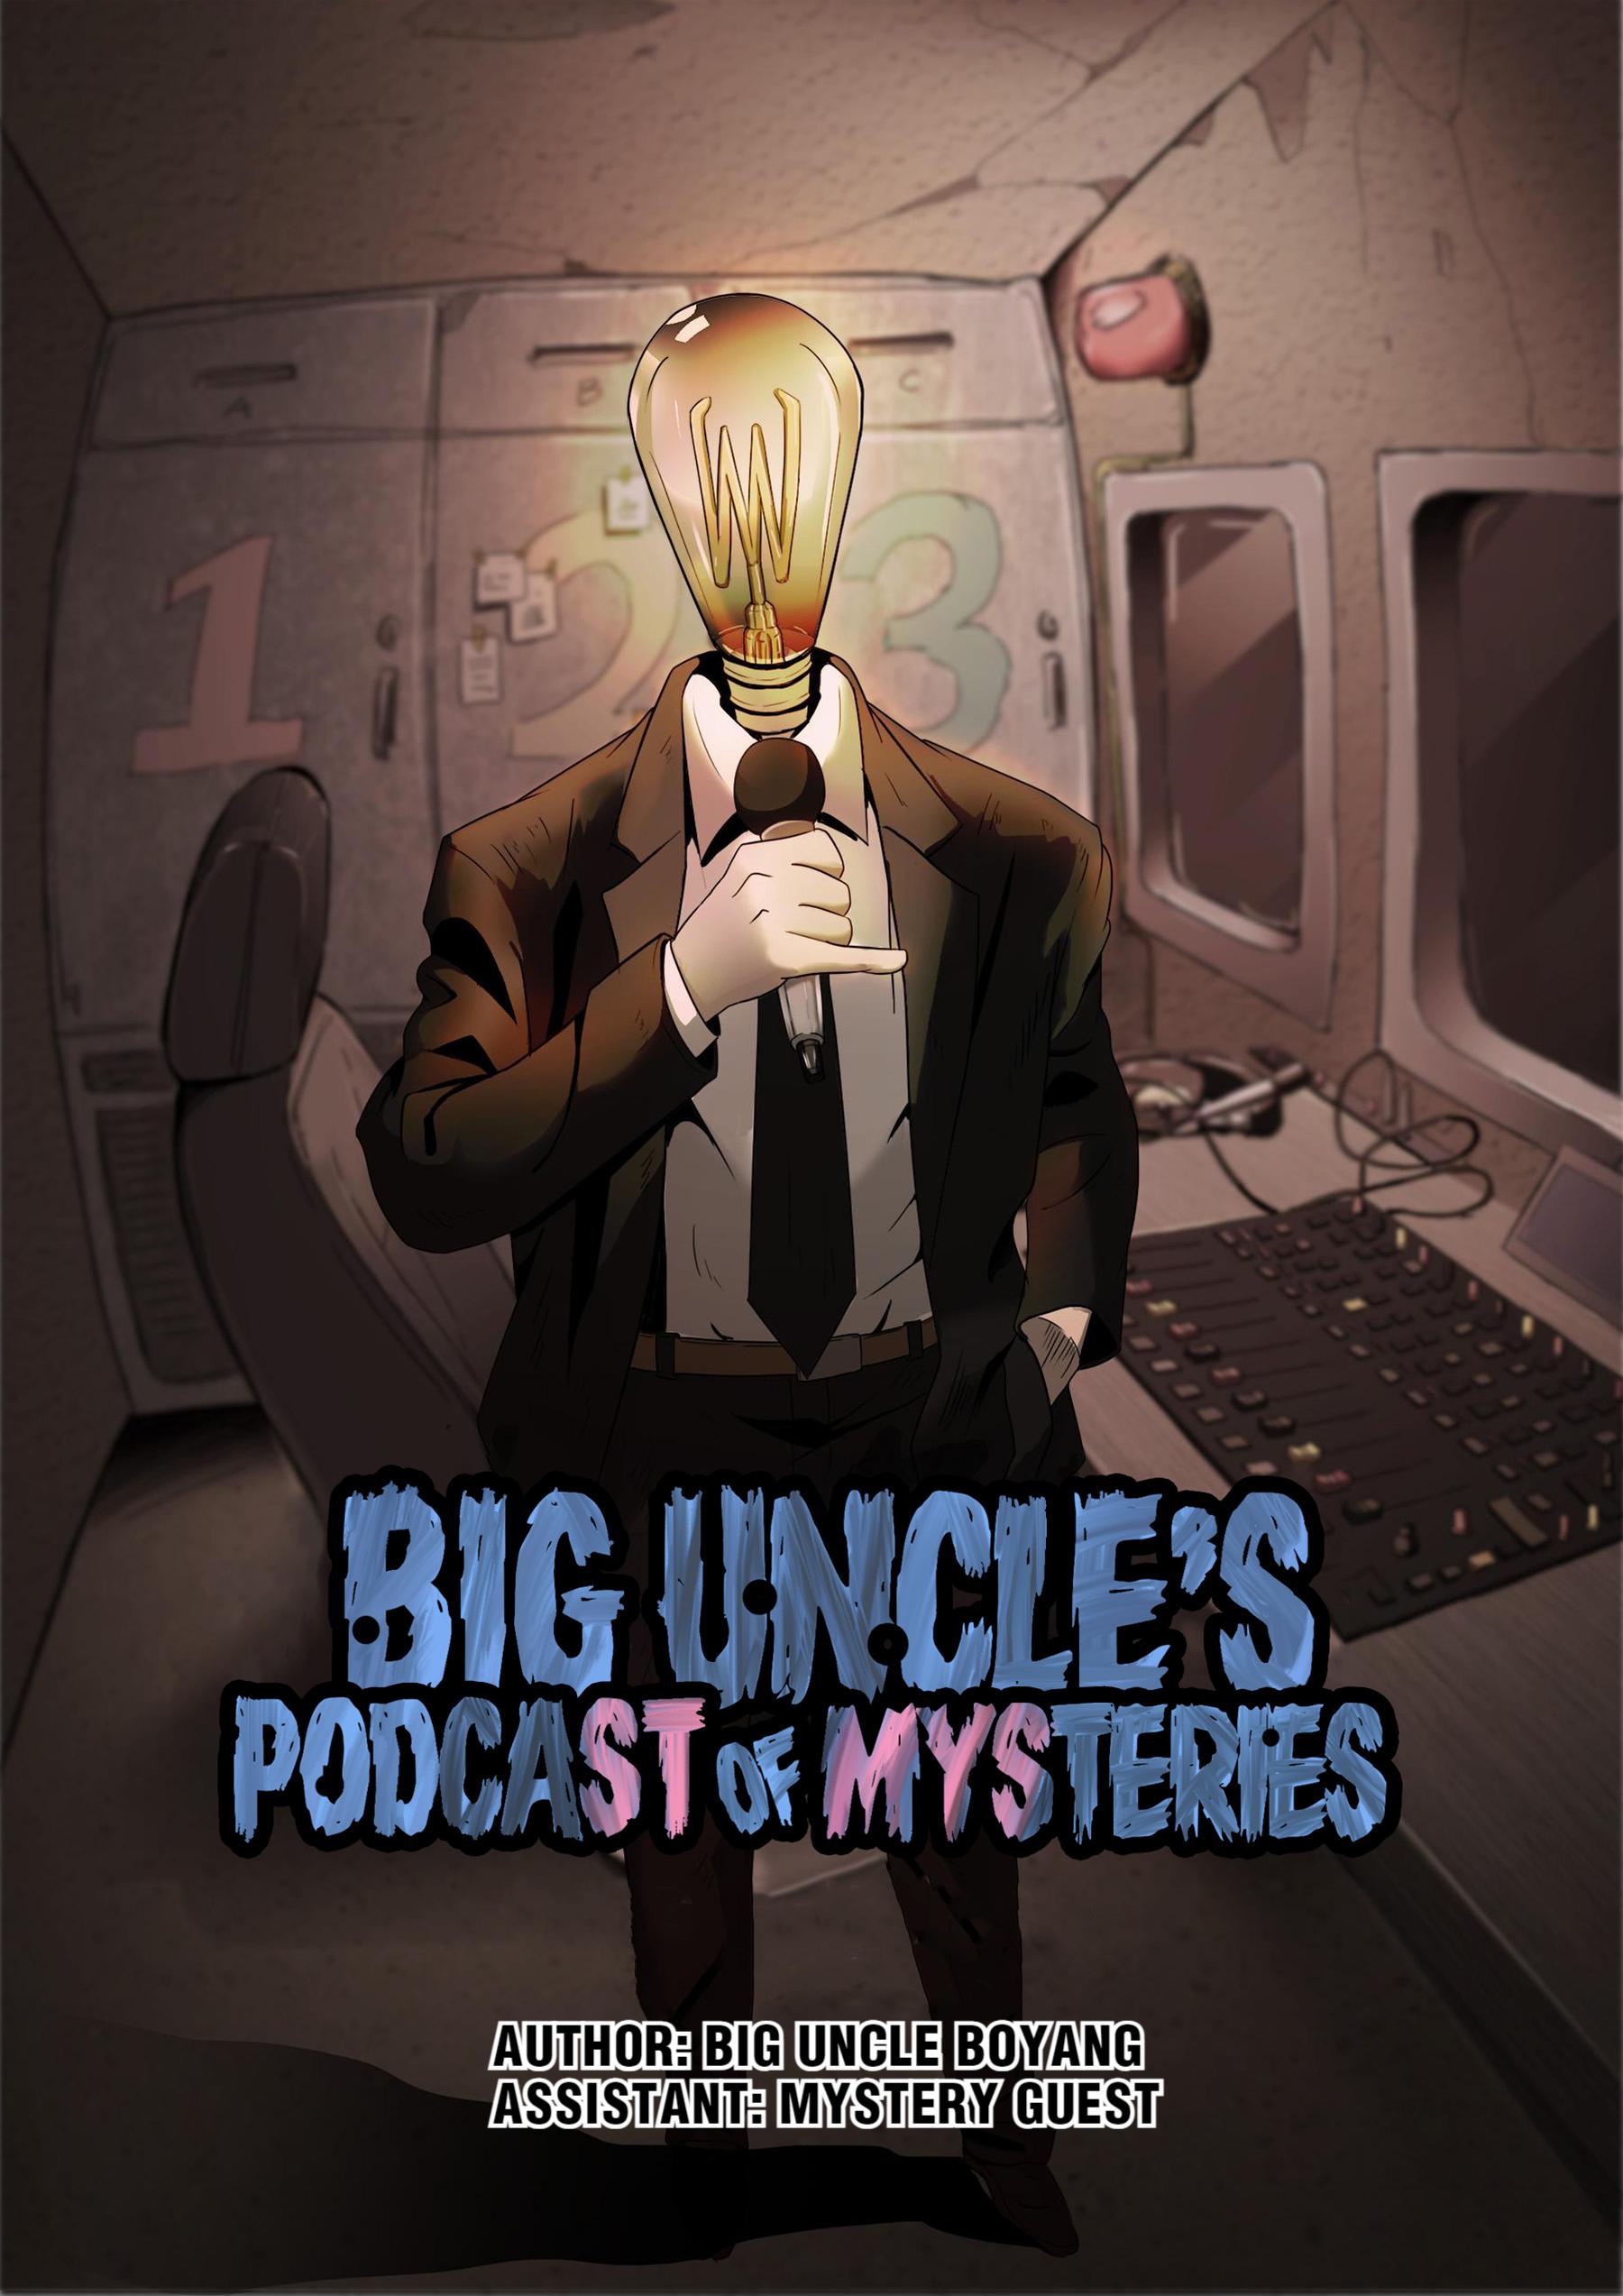 Big Uncle’S Podcast Of Mysteries - Page 1